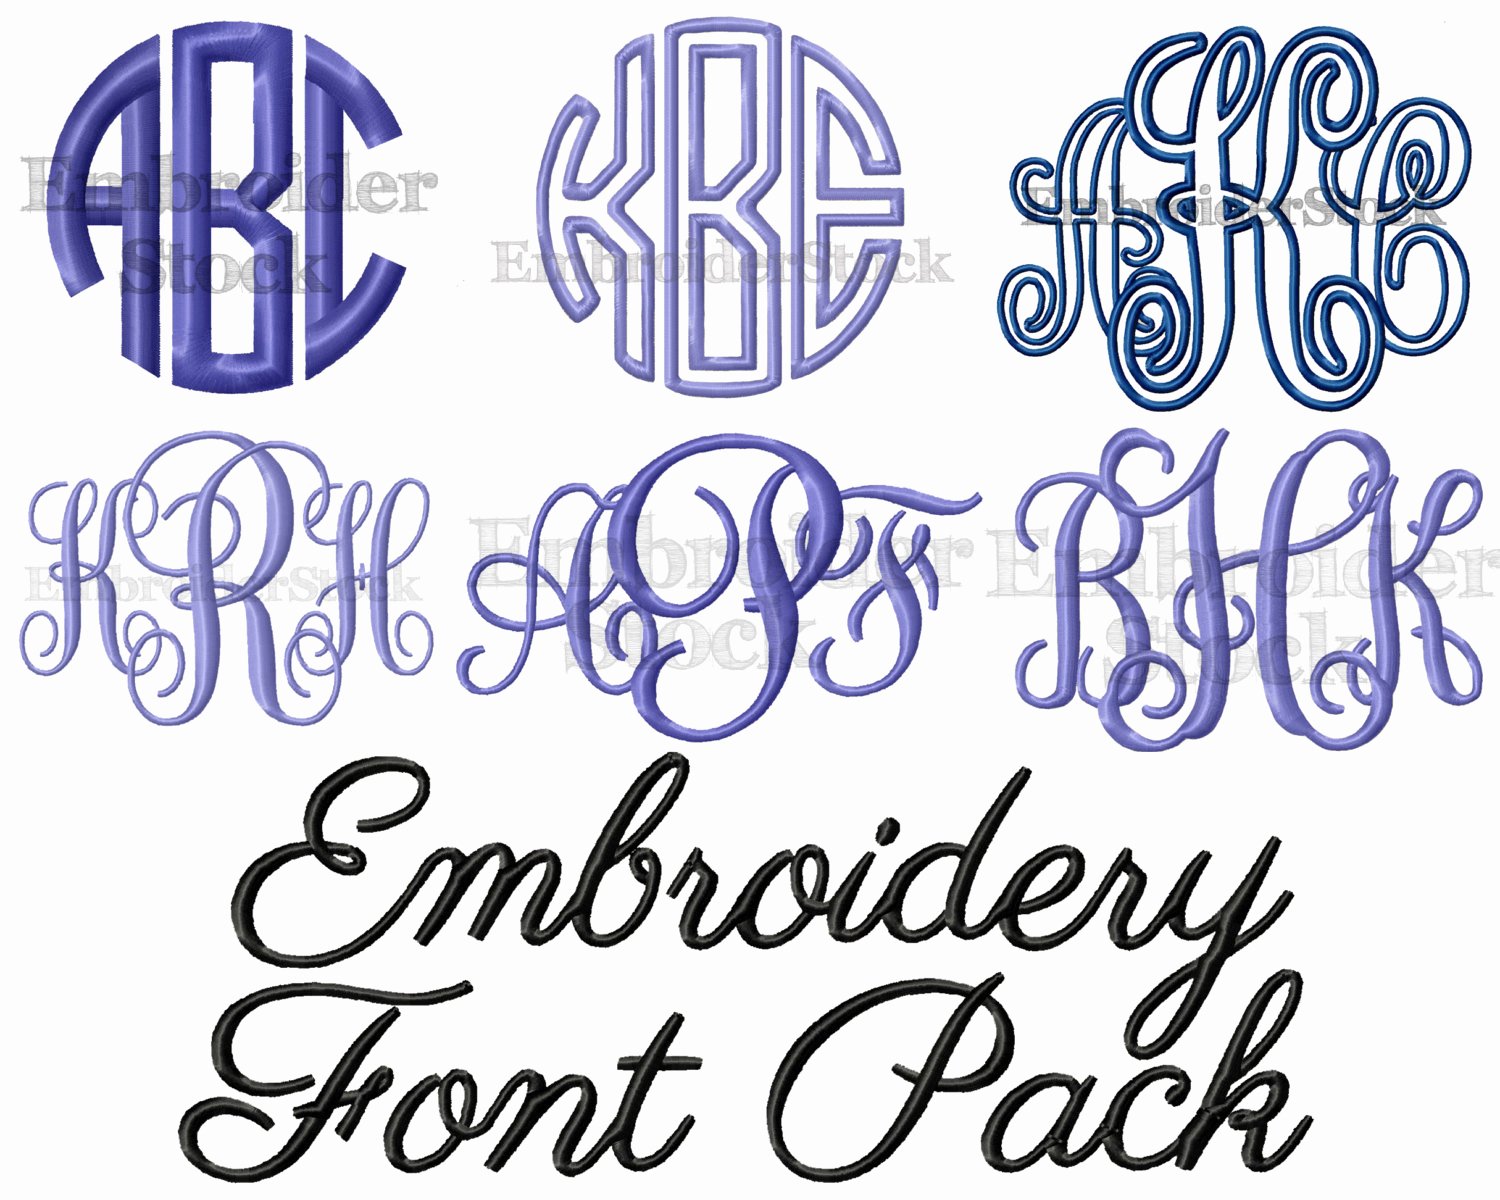 Free Embroidery Fonts Downloads Best Of Embroidery Font Pack 6 Machine Embroidery Fonts In 5